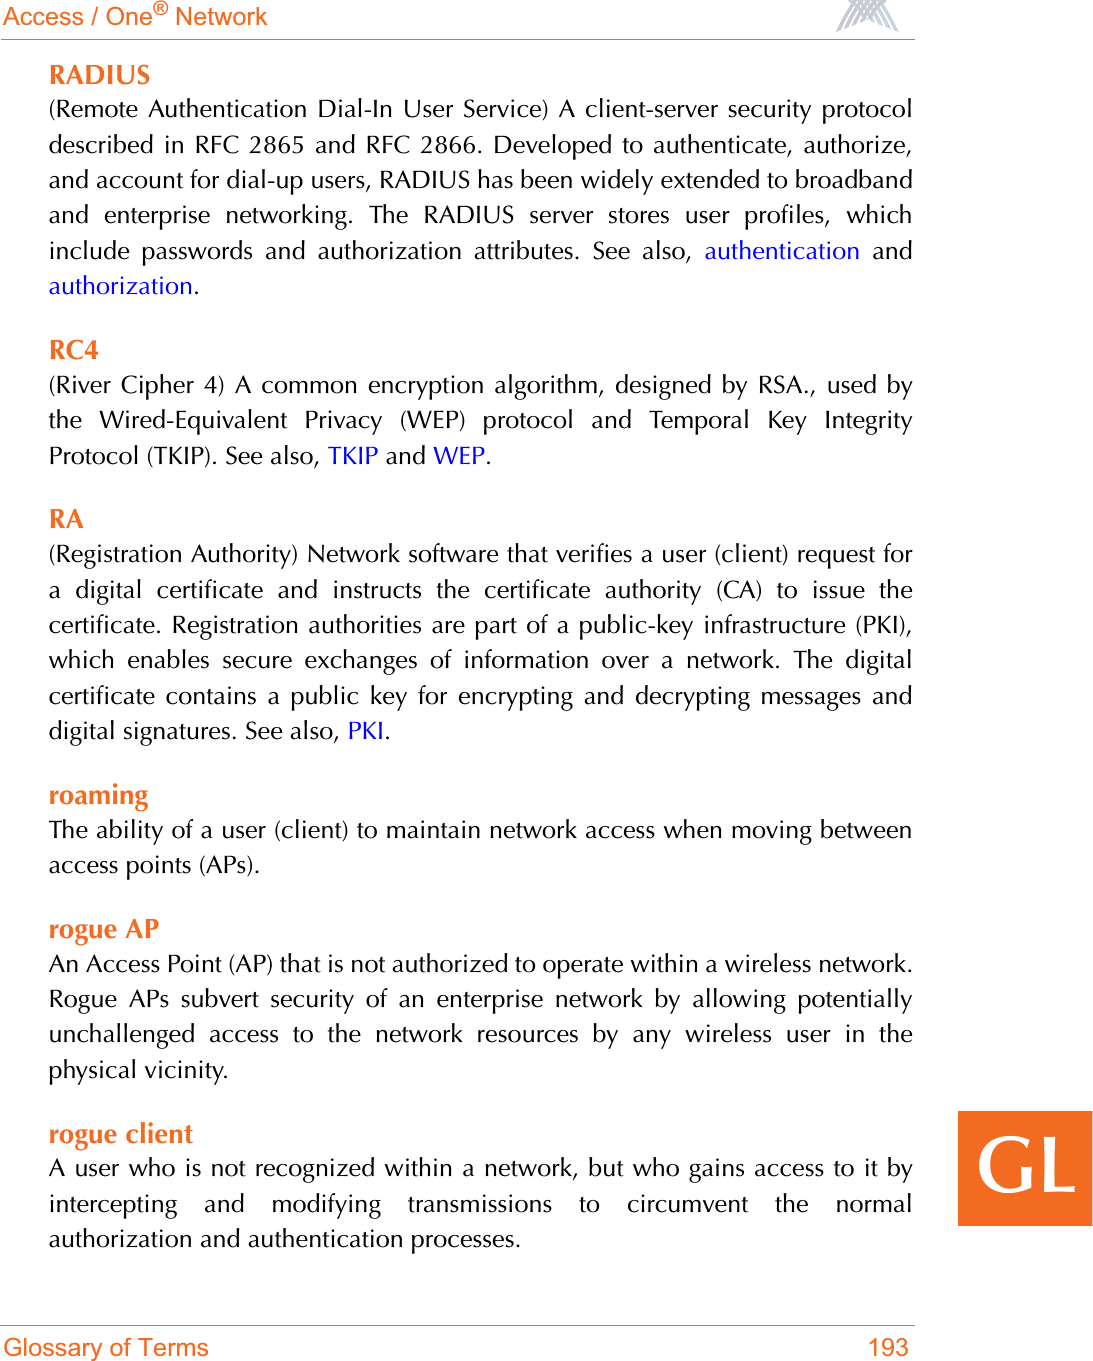 Access / One® NetworkGlossary of Terms 193GLRADIUS(Remote Authentication Dial-In User Service) A client-server security protocoldescribed in RFC 2865 and RFC 2866. Developed to authenticate, authorize,and account for dial-up users, RADIUS has been widely extended to broadbandand enterprise networking. The RADIUS server stores user profiles, whichinclude passwords and authorization attributes. See also, authentication andauthorization.RC4(River Cipher 4) A common encryption algorithm, designed by RSA., used bythe Wired-Equivalent Privacy (WEP) protocol and Temporal Key IntegrityProtocol (TKIP). See also, TKIP and WEP.RA(Registration Authority) Network software that verifies a user (client) request fora digital certificate and instructs the certificate authority (CA) to issue thecertificate. Registration authorities are part of a public-key infrastructure (PKI),which enables secure exchanges of information over a network. The digitalcertificate contains a public key for encrypting and decrypting messages anddigital signatures. See also, PKI.roamingThe ability of a user (client) to maintain network access when moving betweenaccess points (APs).rogue APAn Access Point (AP) that is not authorized to operate within a wireless network.Rogue APs subvert security of an enterprise network by allowing potentiallyunchallenged access to the network resources by any wireless user in thephysical vicinity.rogue clientA user who is not recognized within a network, but who gains access to it byintercepting and modifying transmissions to circumvent the normalauthorization and authentication processes.